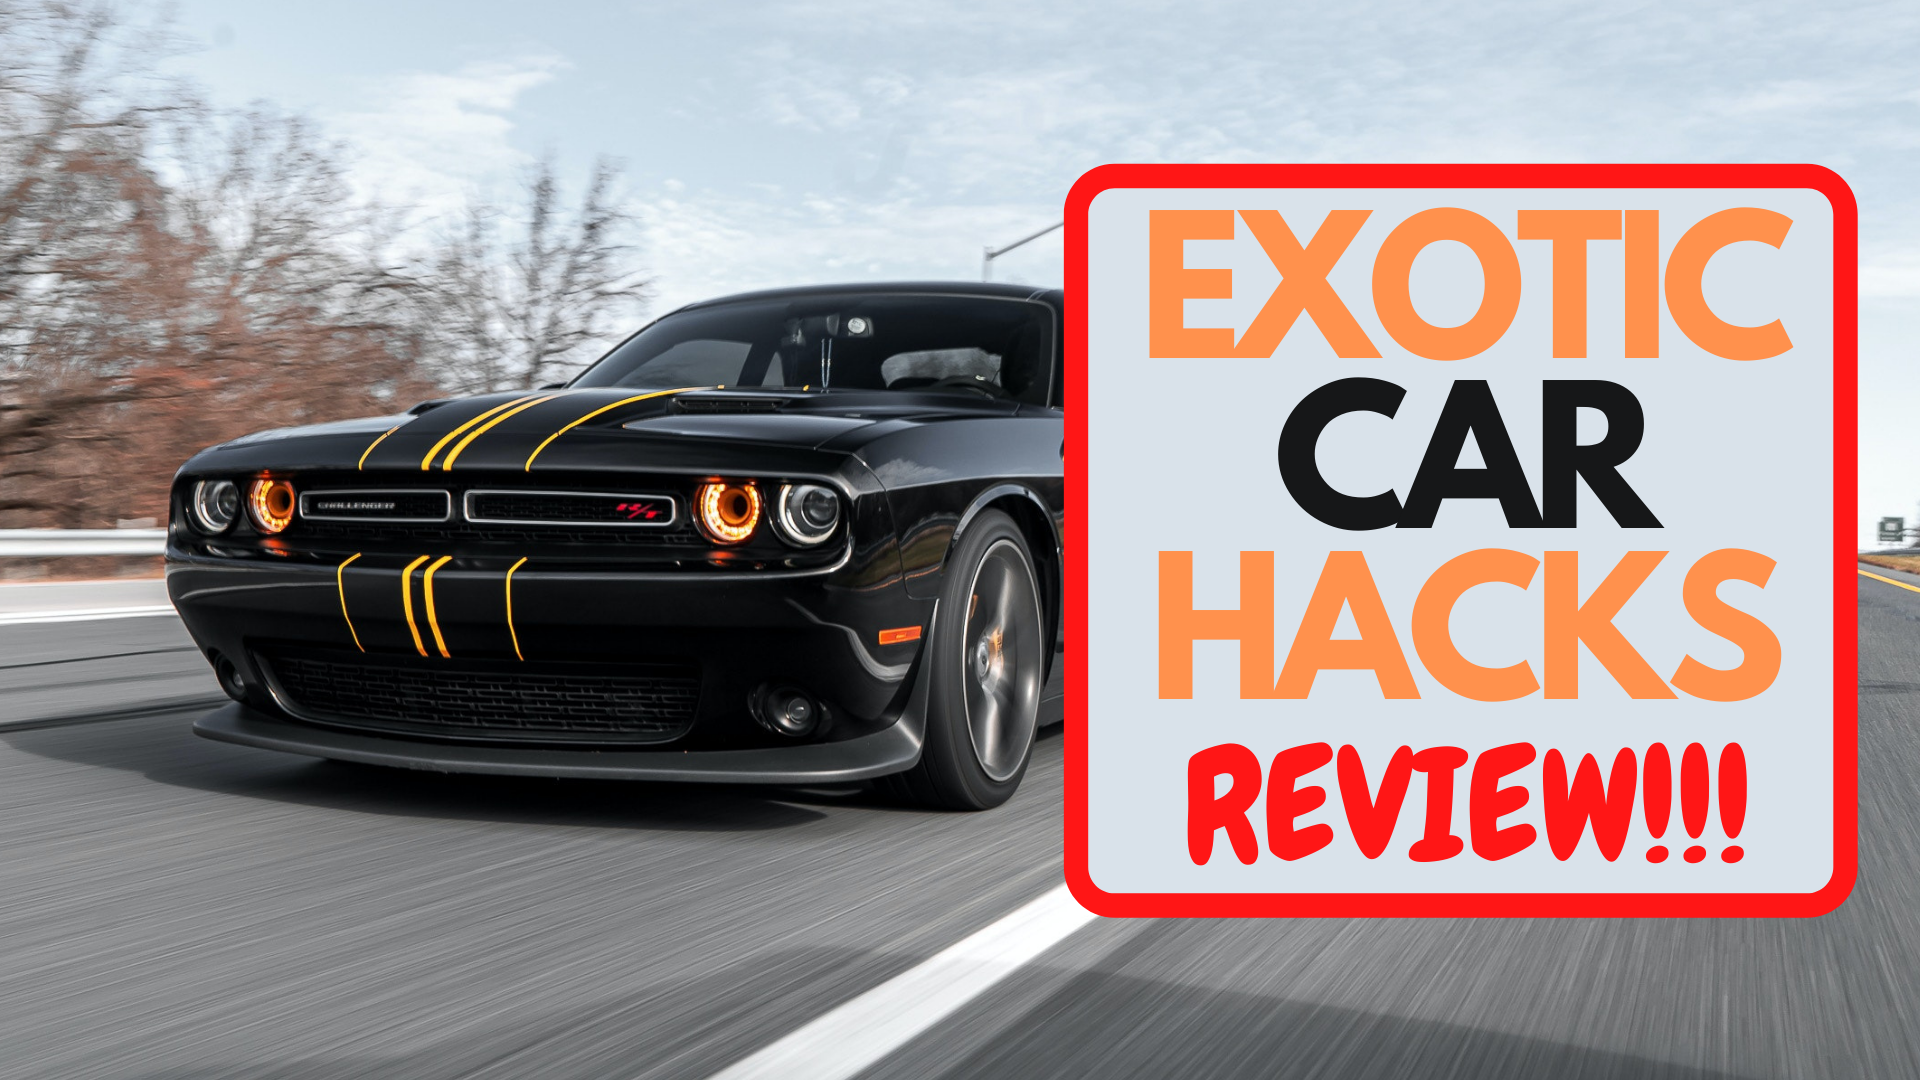 Is Exotic Car Hacks a Scam